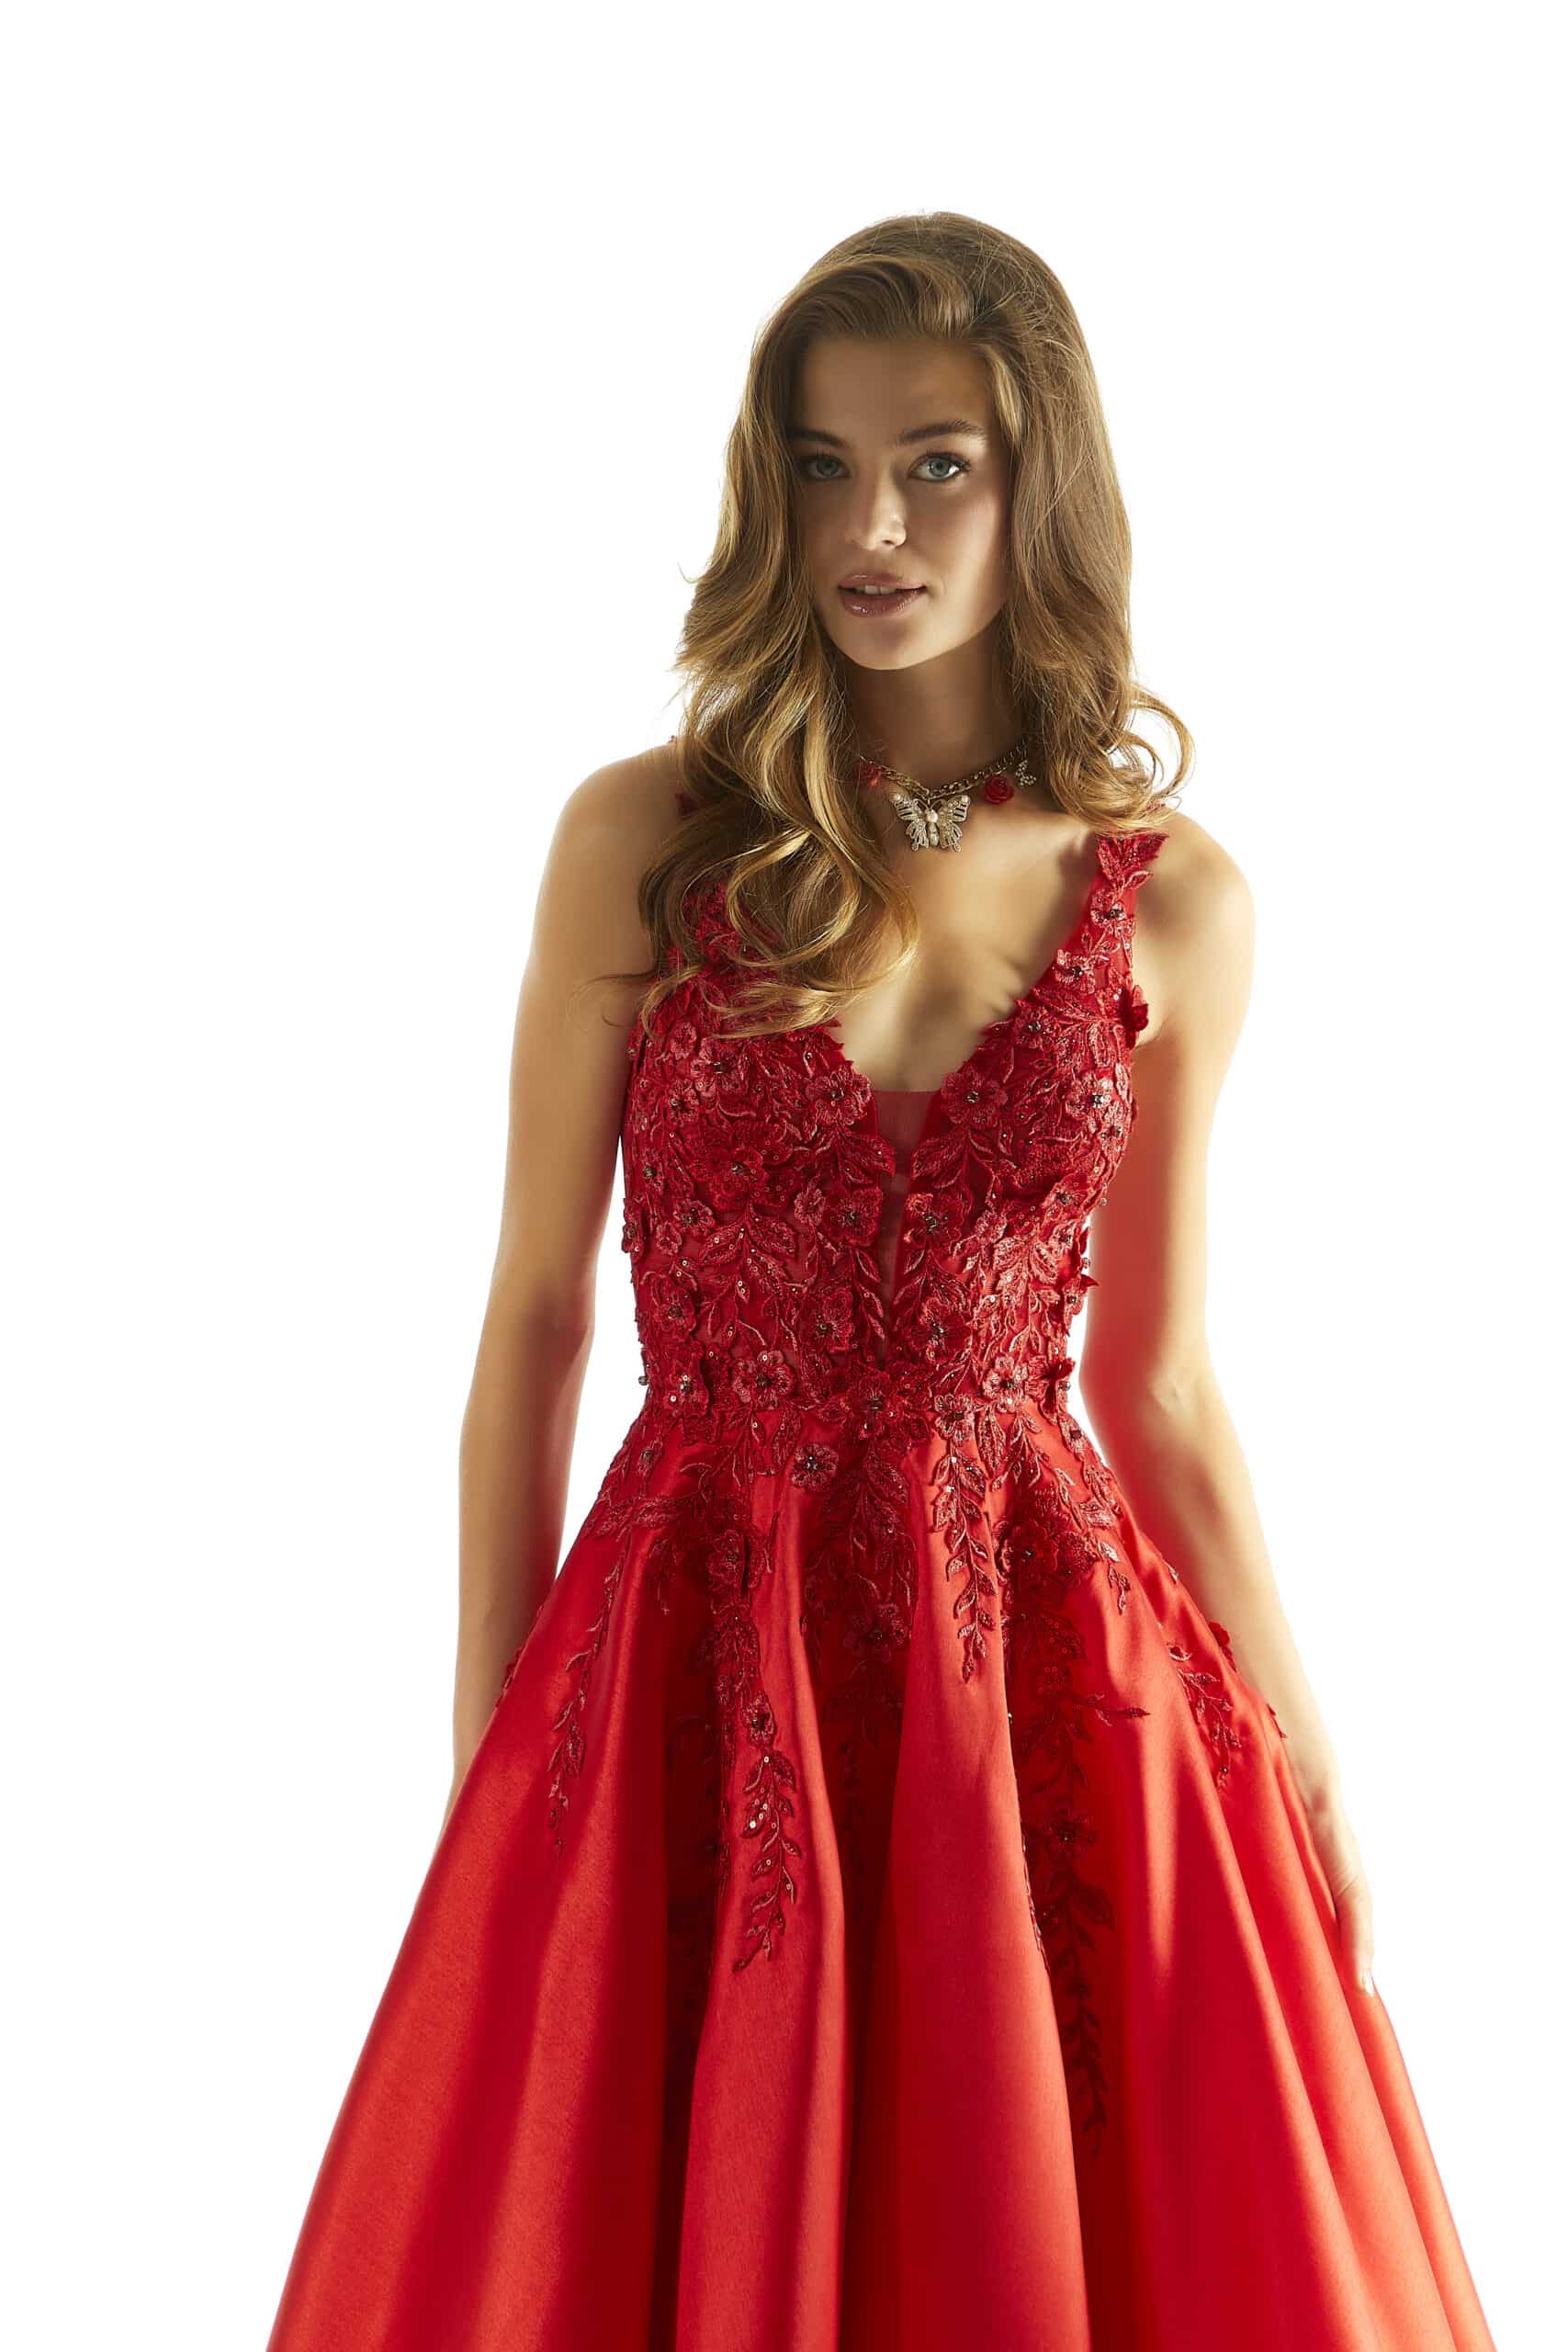 How to Pick a Prom Dresses Color That Flatter Your Skin Tone?